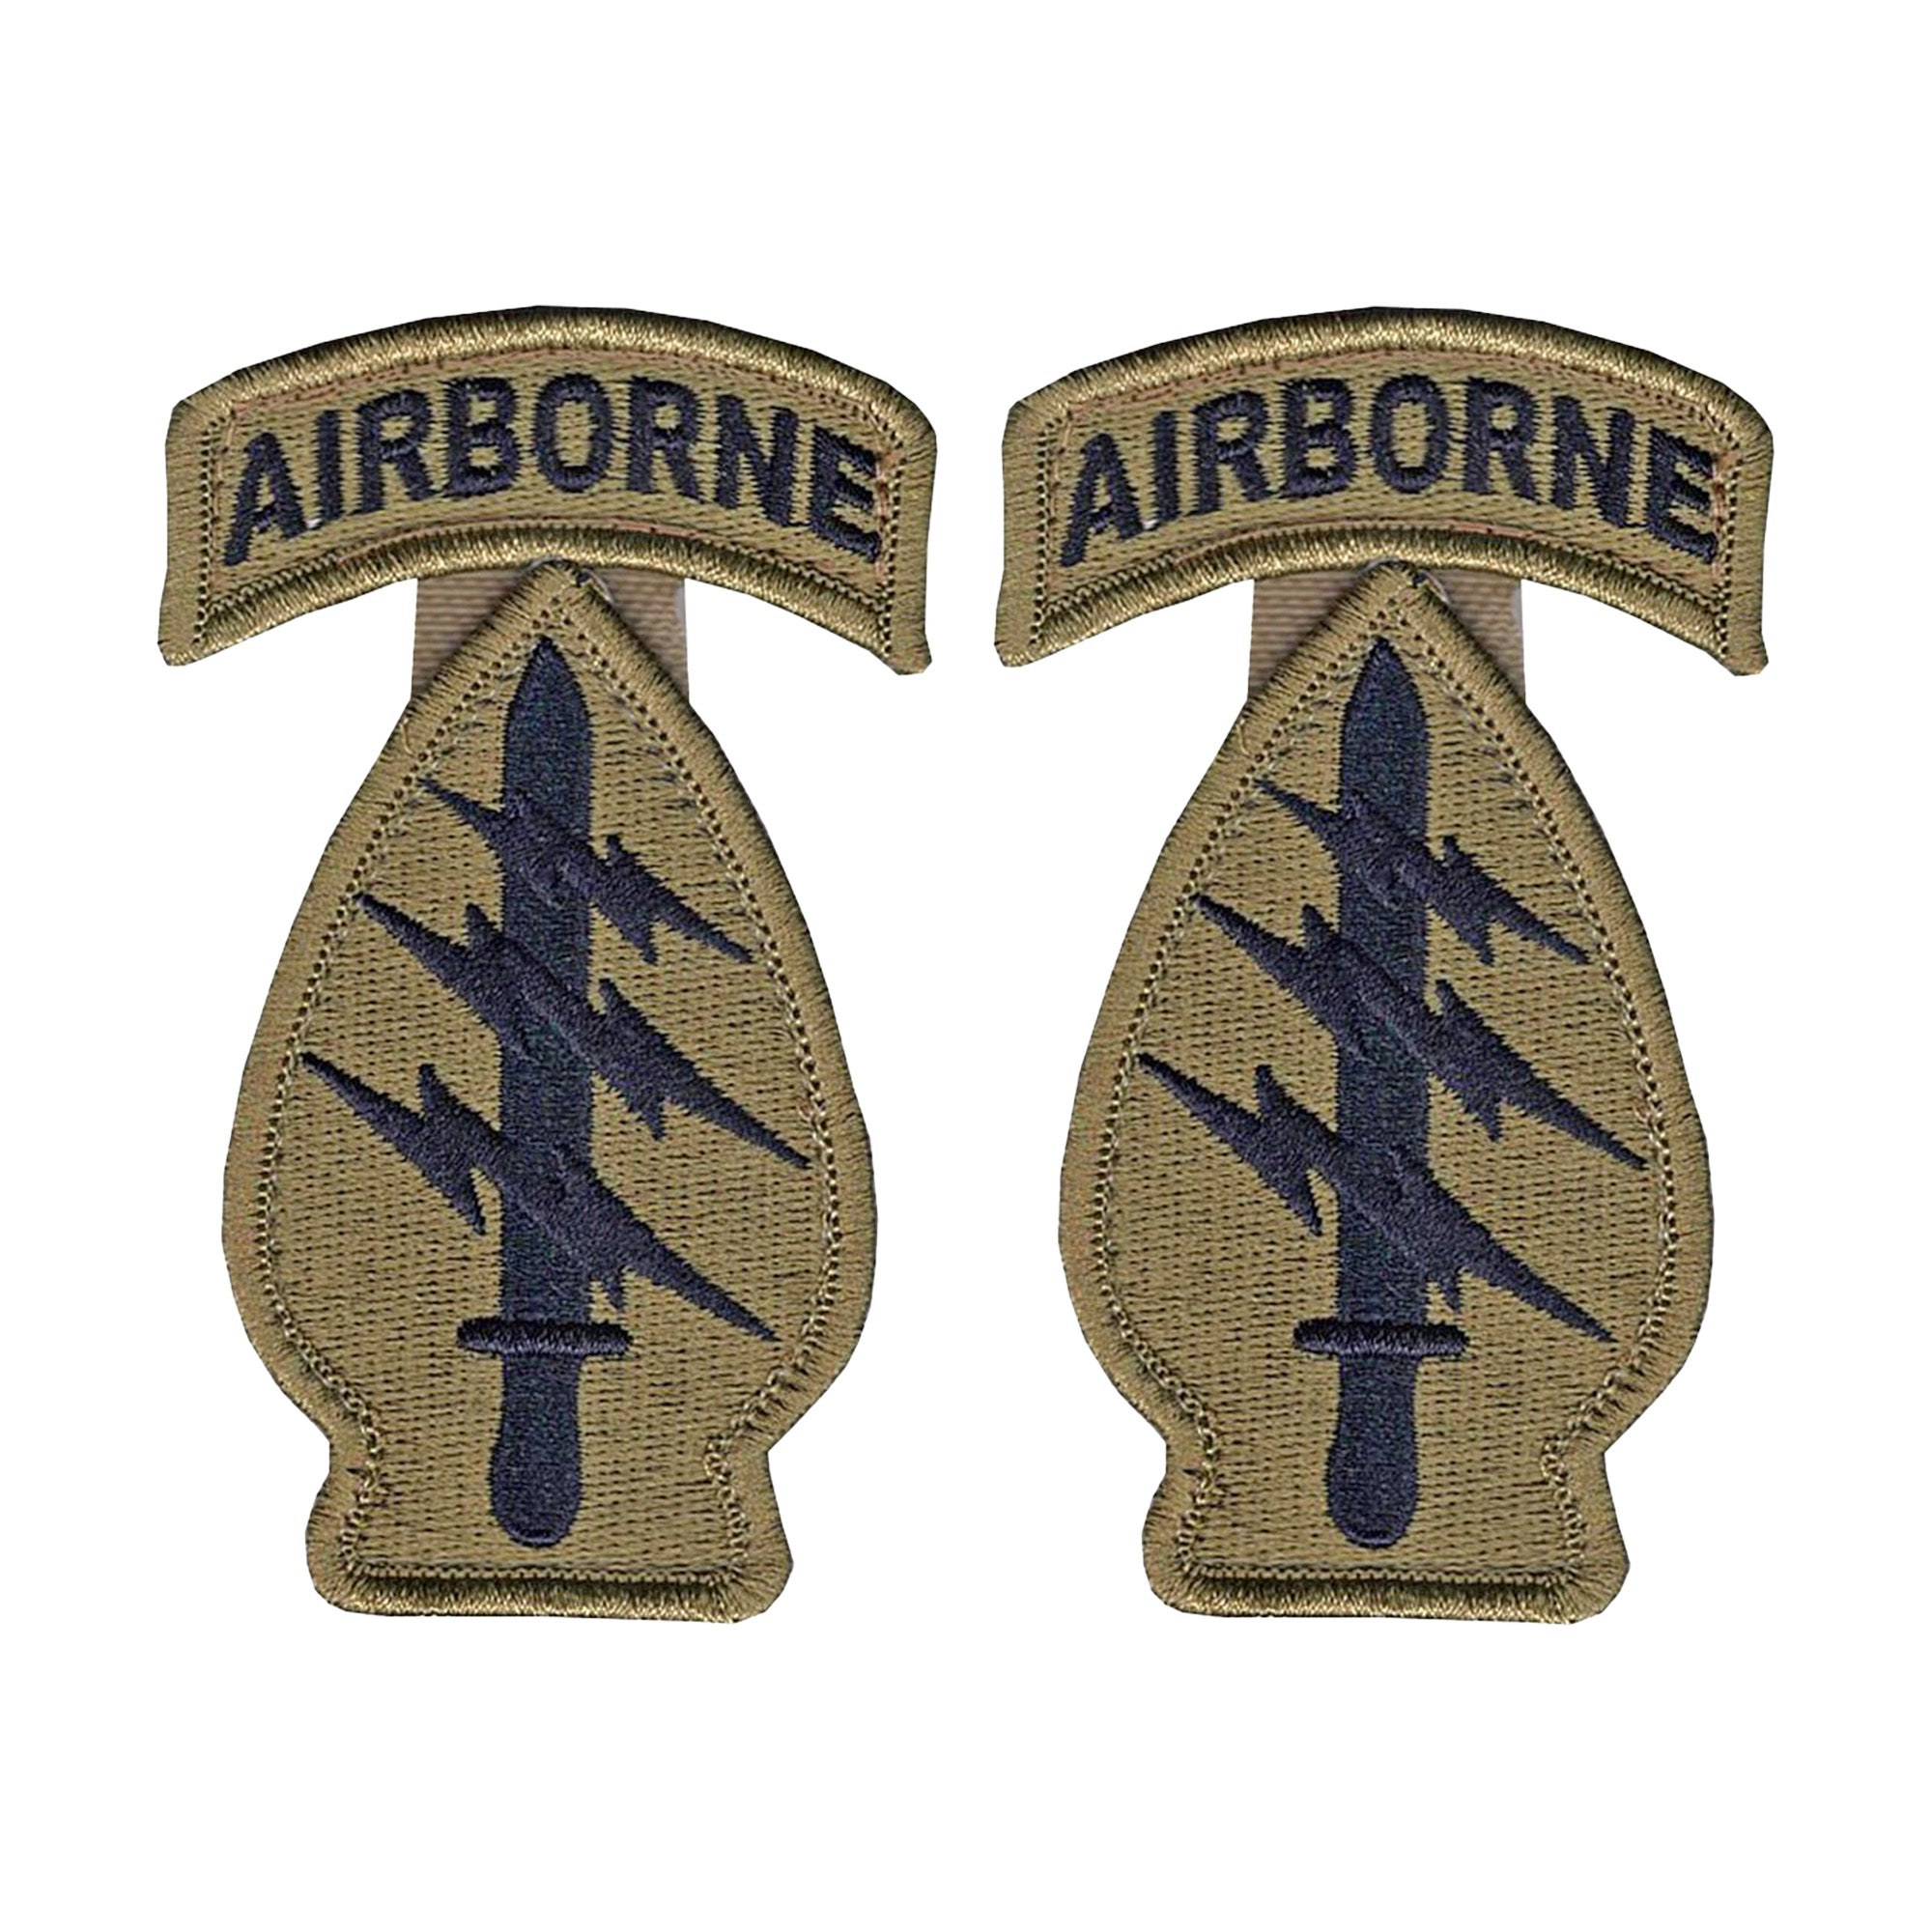 Special Forces OCP Patch with Hook Fastener and Airborne Tab (pair) - Insignia Depot